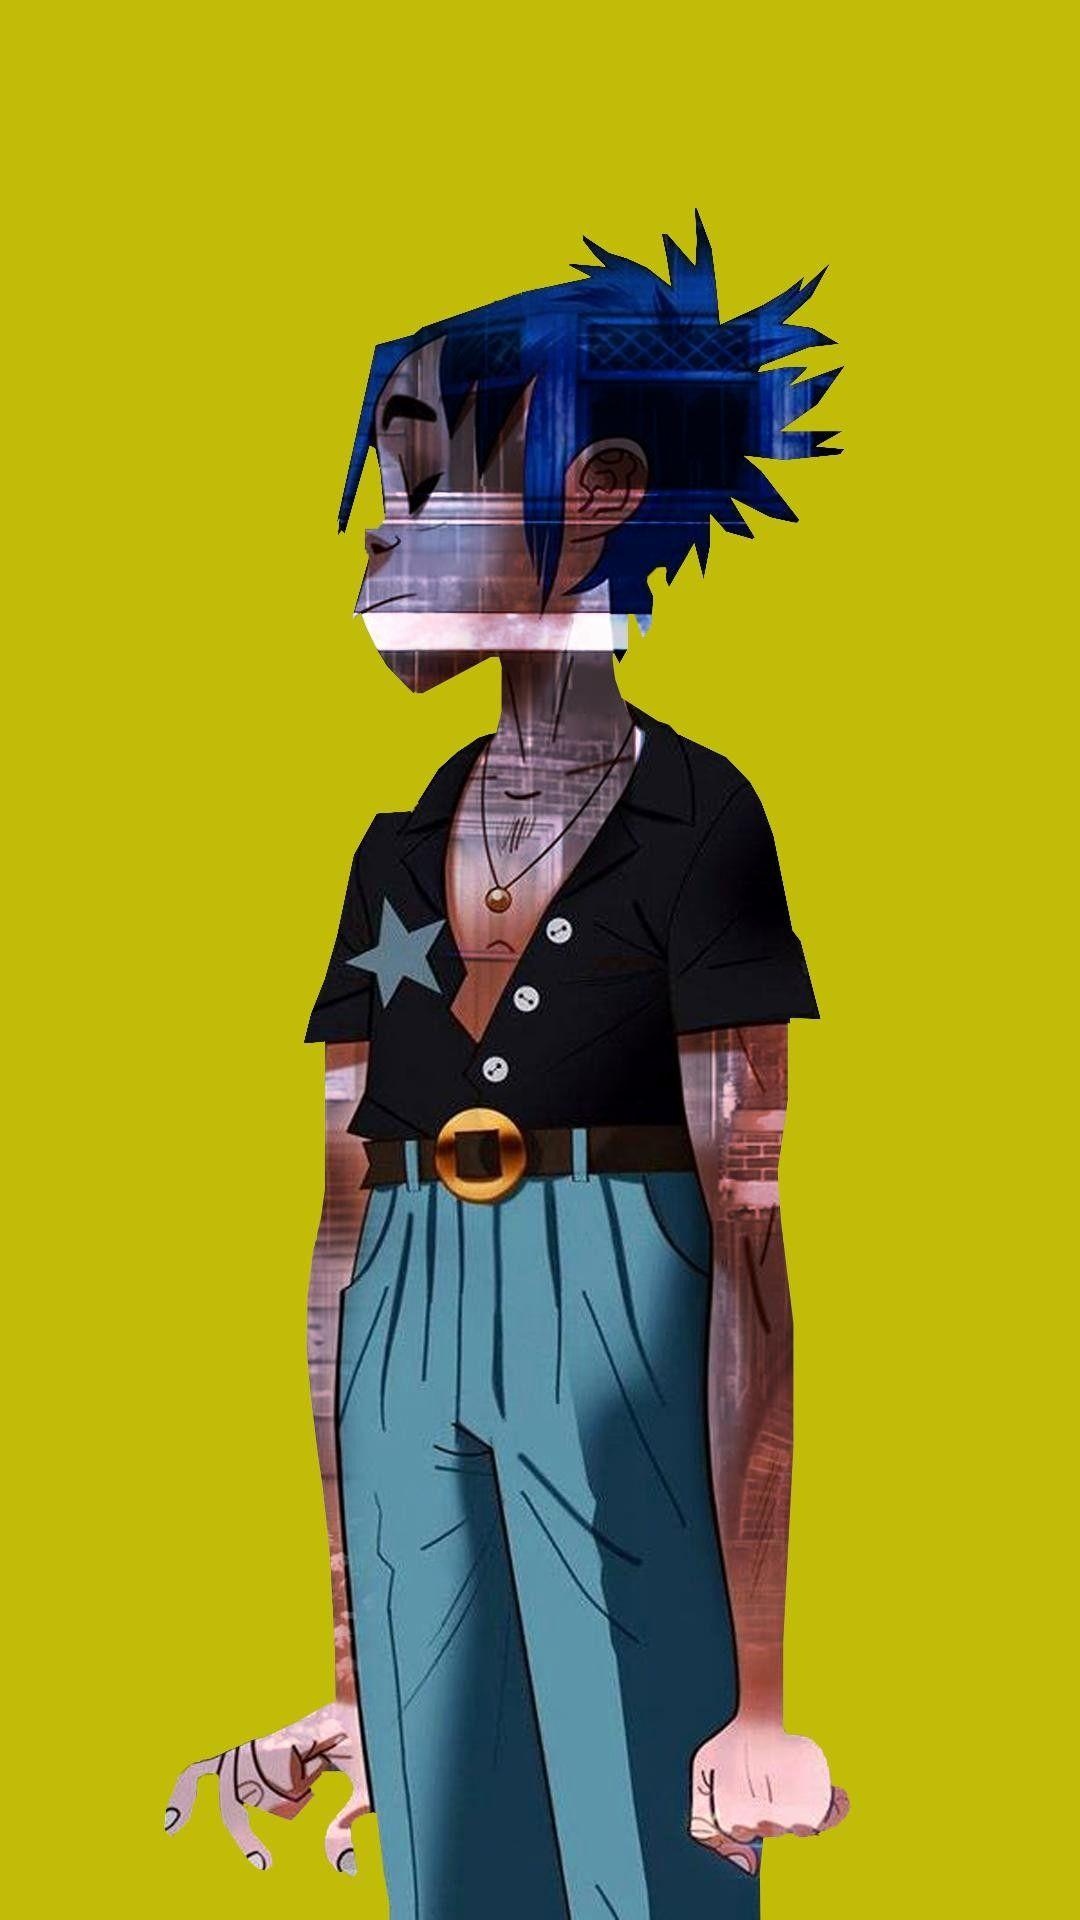 Gorillaz: Virtual band, Face reveal, Two decades of the animated electronic career. 1080x1920 Full HD Wallpaper.